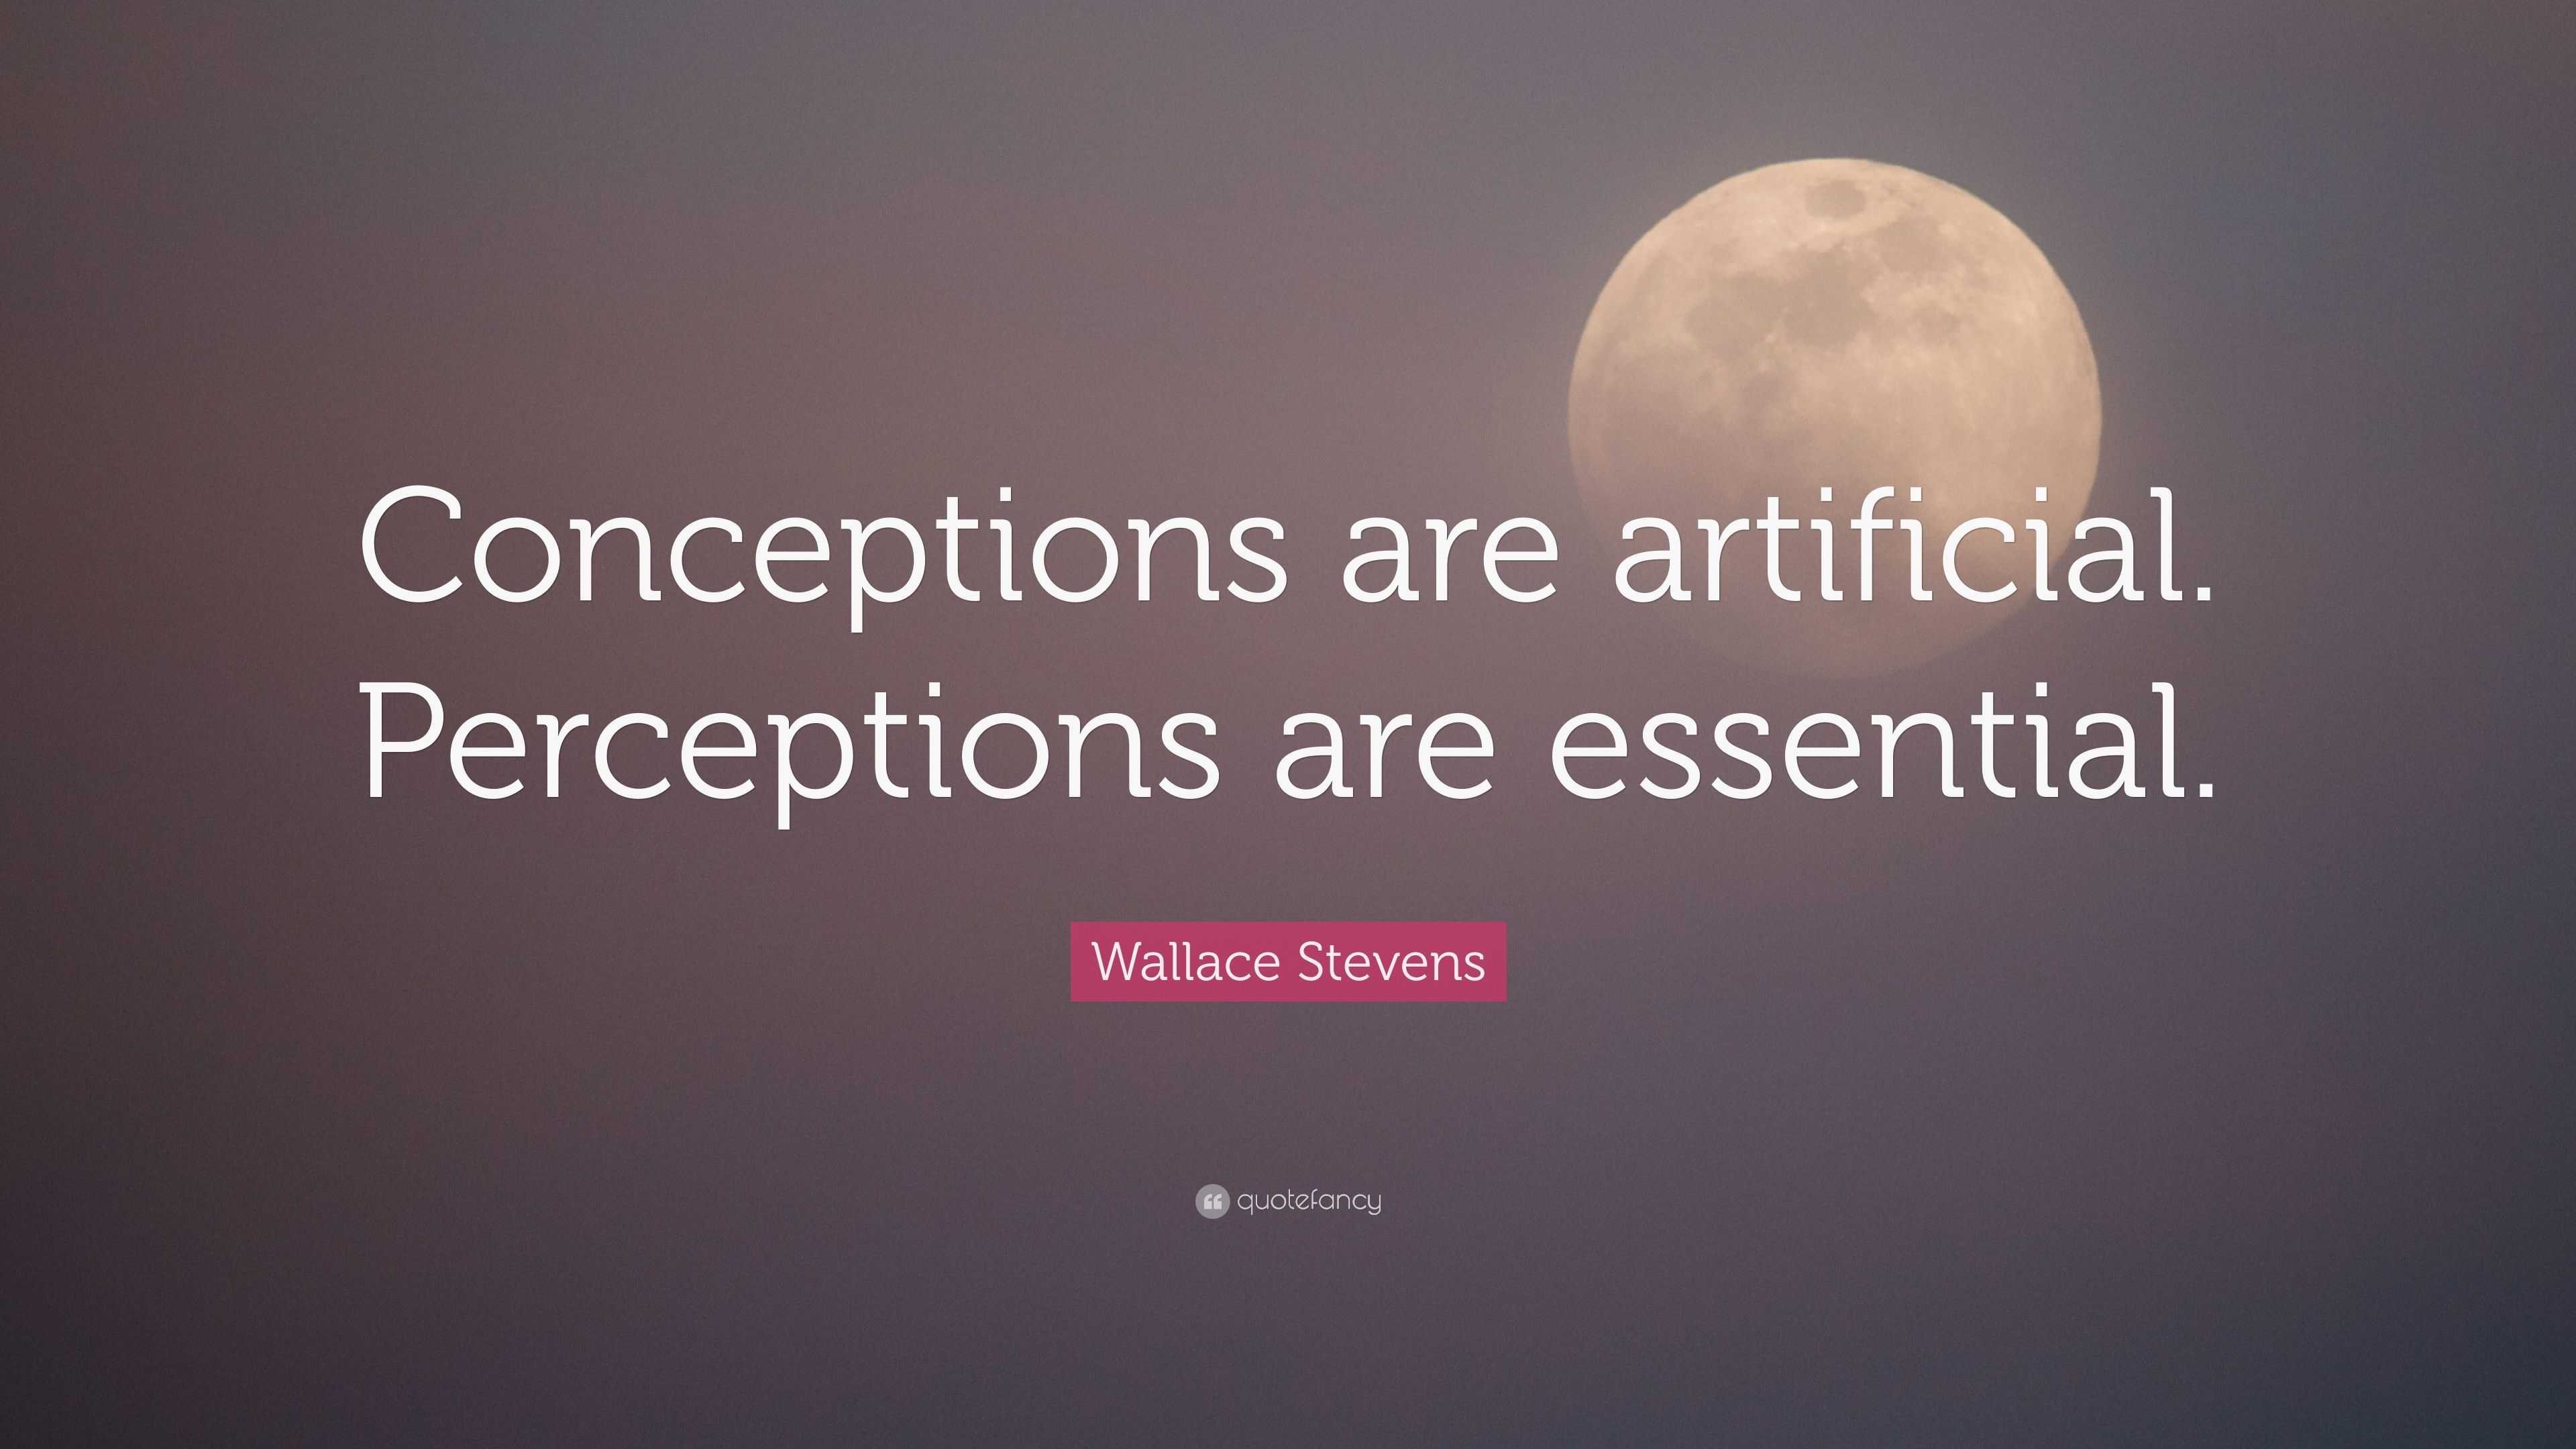 Wallace Stevens Quote: “Conceptions are artificial. Perceptions are ...